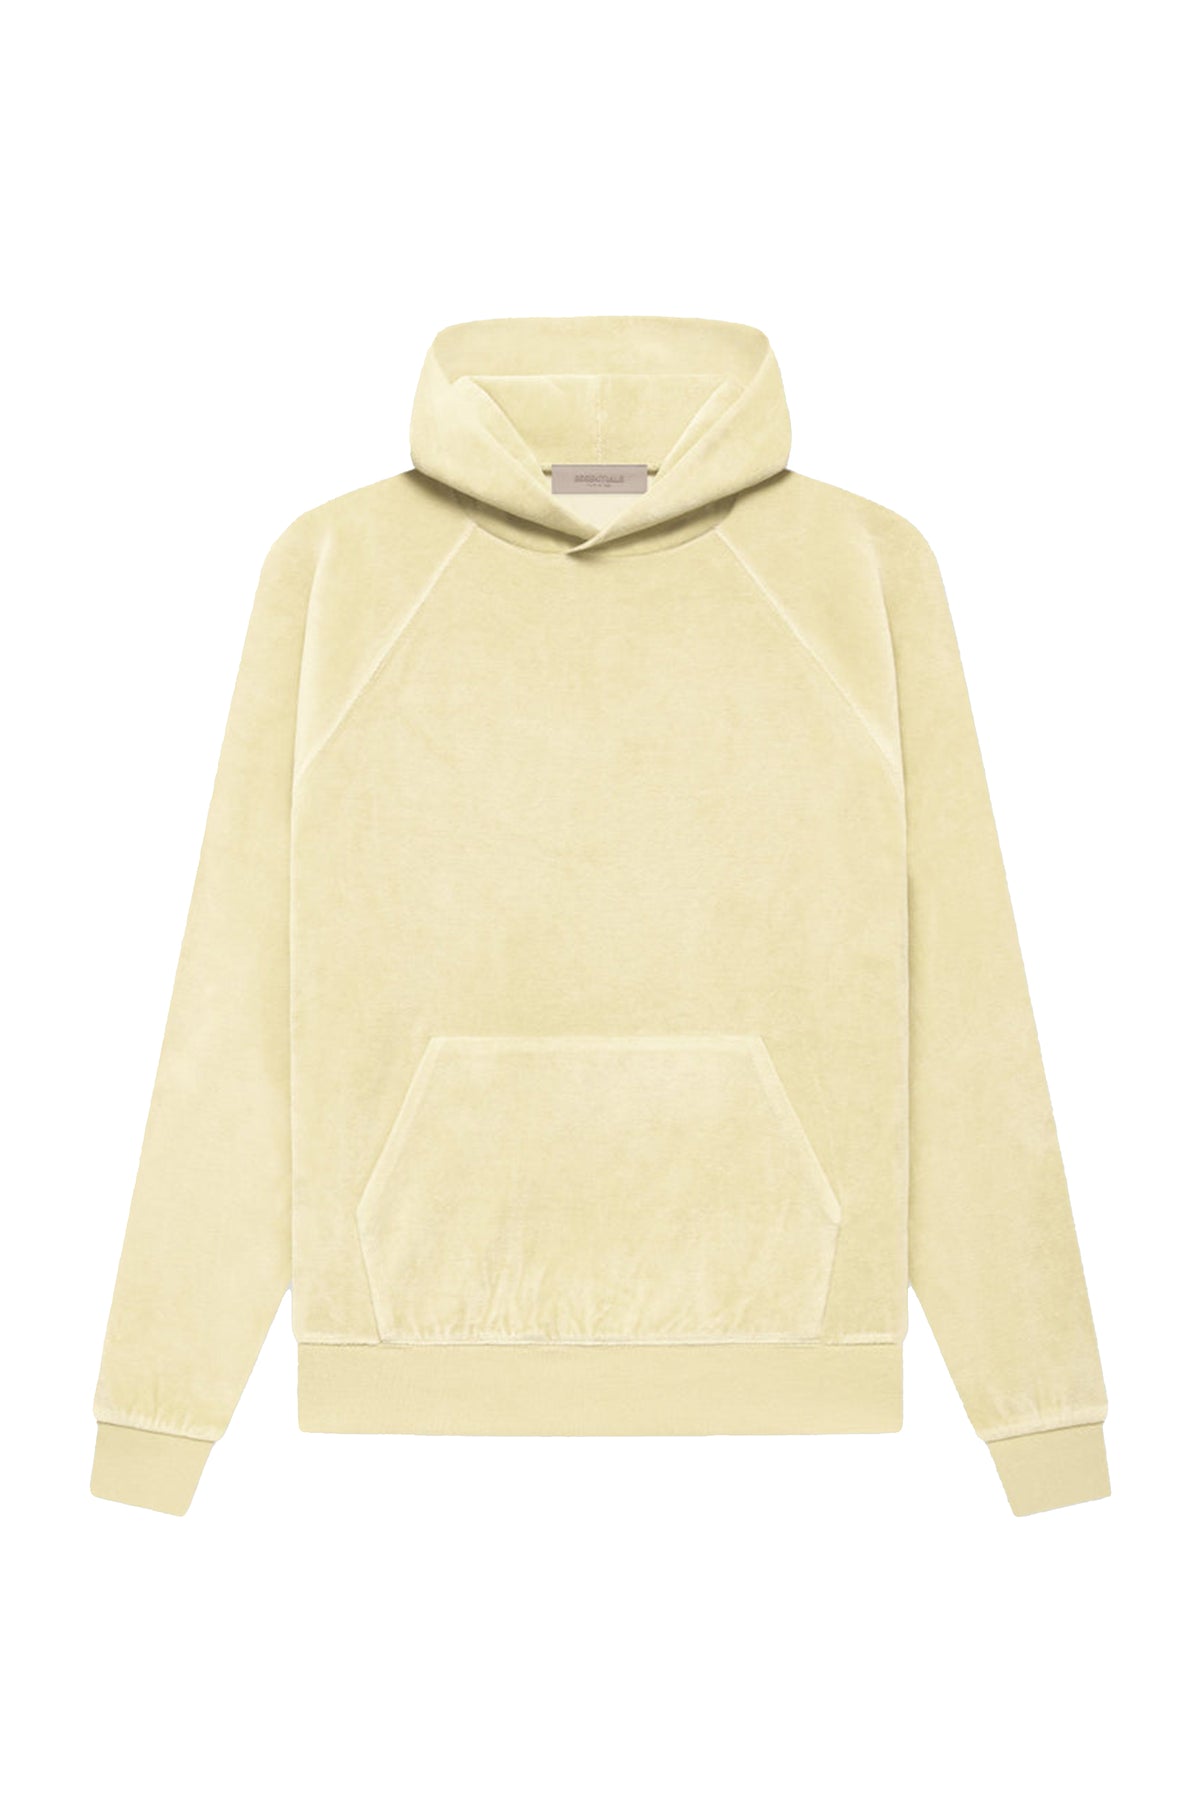 VELOUR HOODIE / CANARY